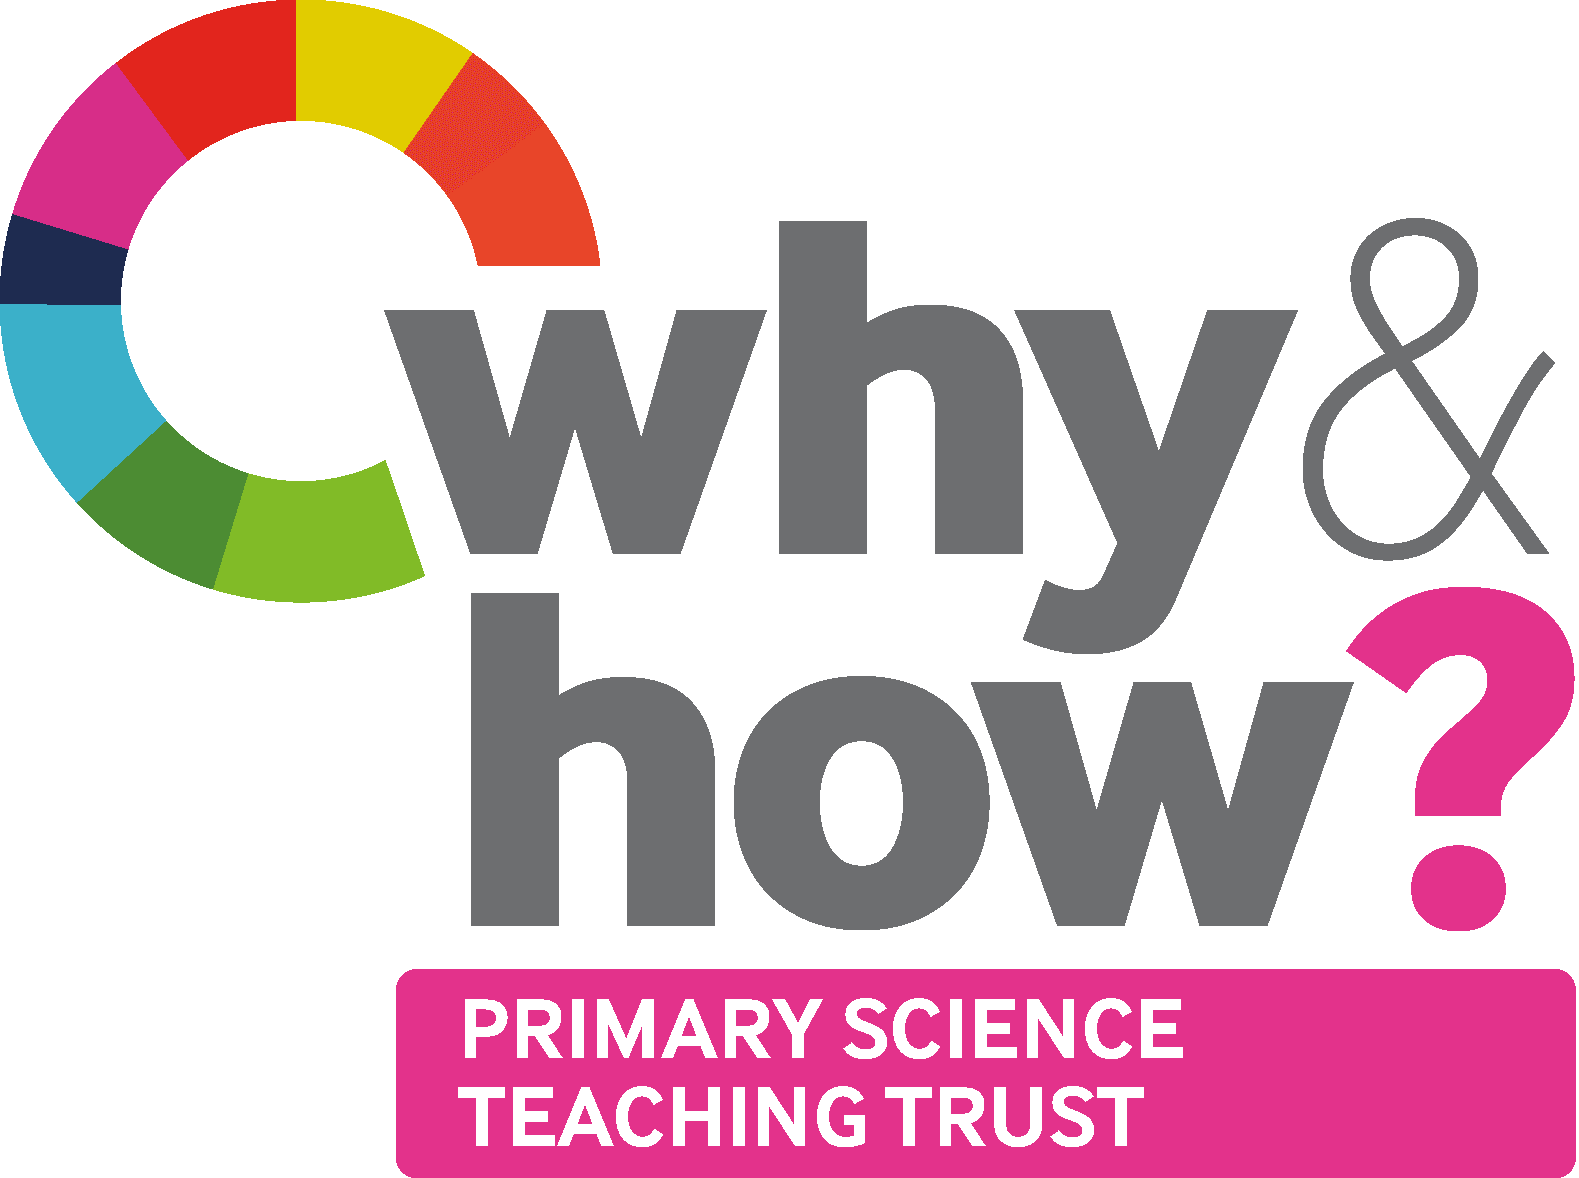 AstraZeneca Science Teaching Trust has changed to be the Primary Science Teaching Trust and they have supported the revision and updating of further resources